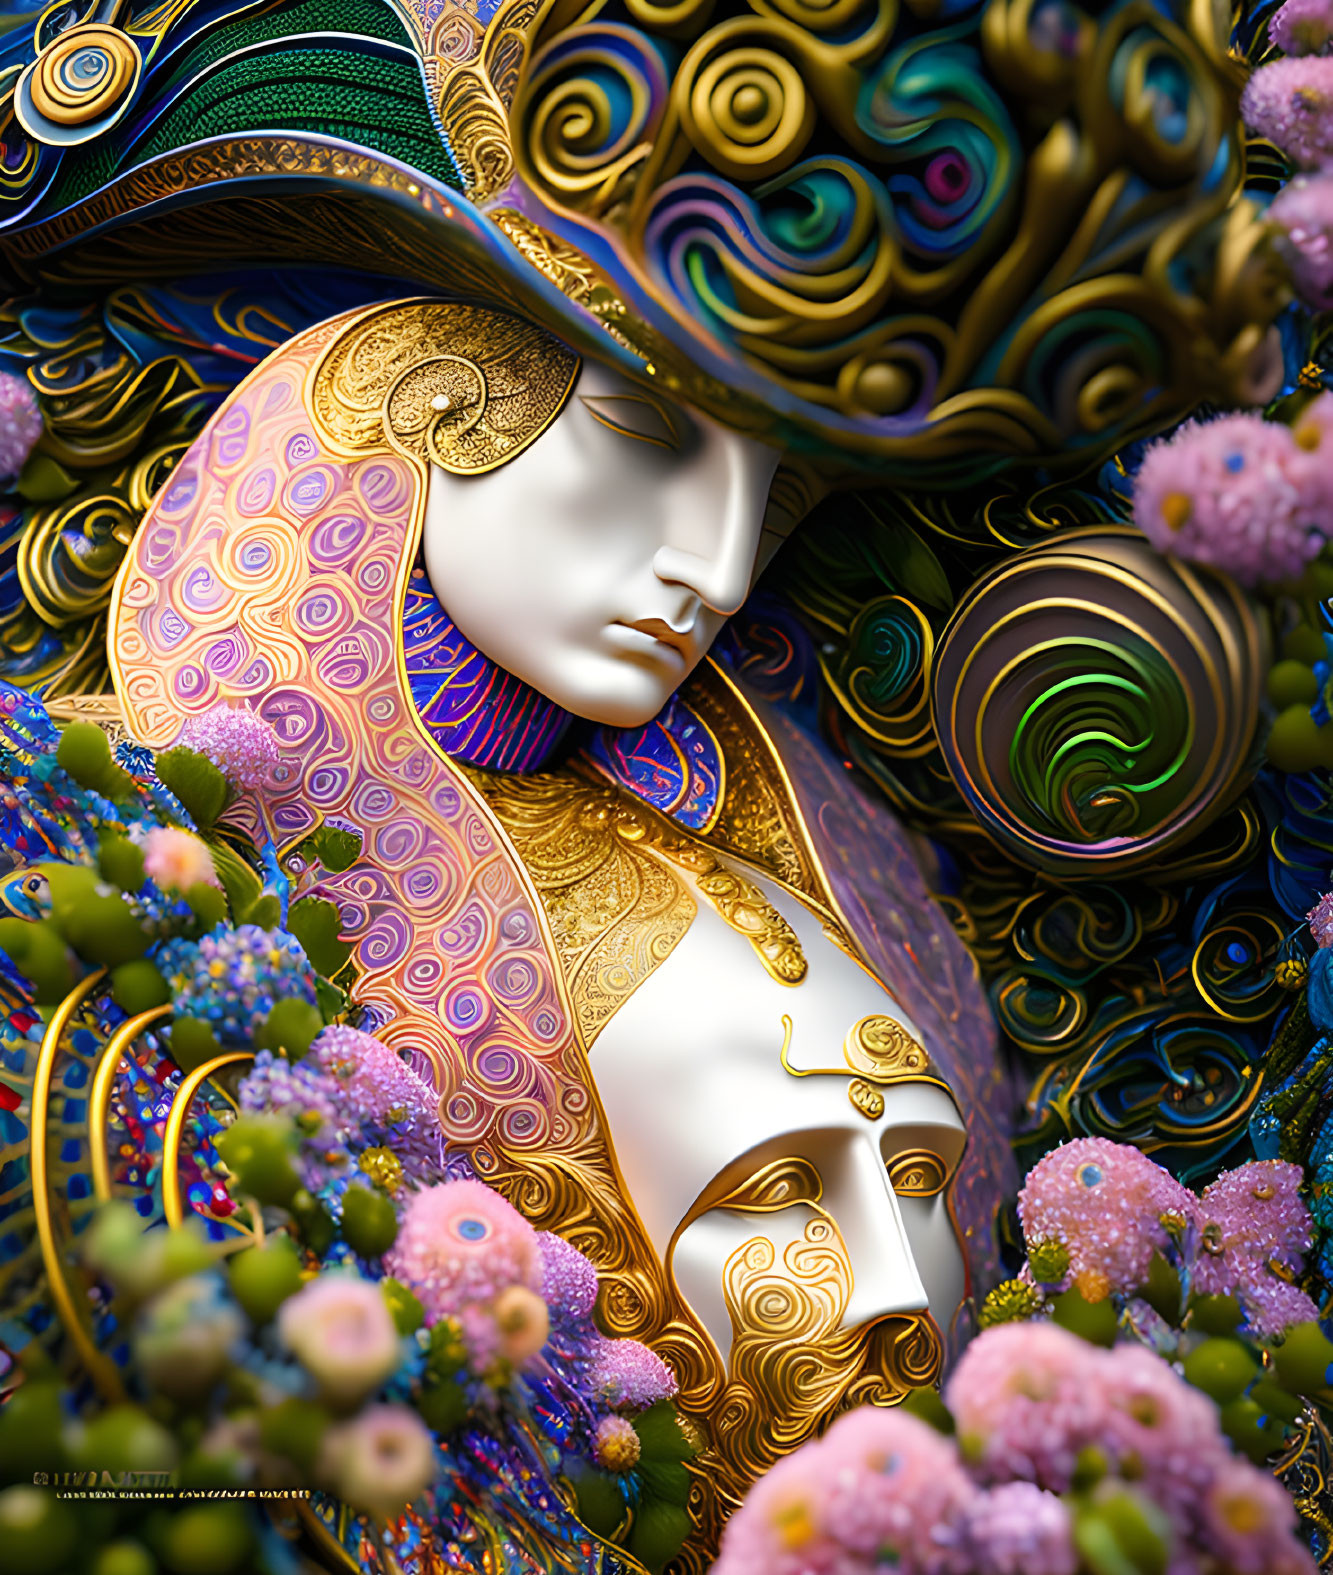 Stylized digital artwork of figure with golden mask and floral patterns